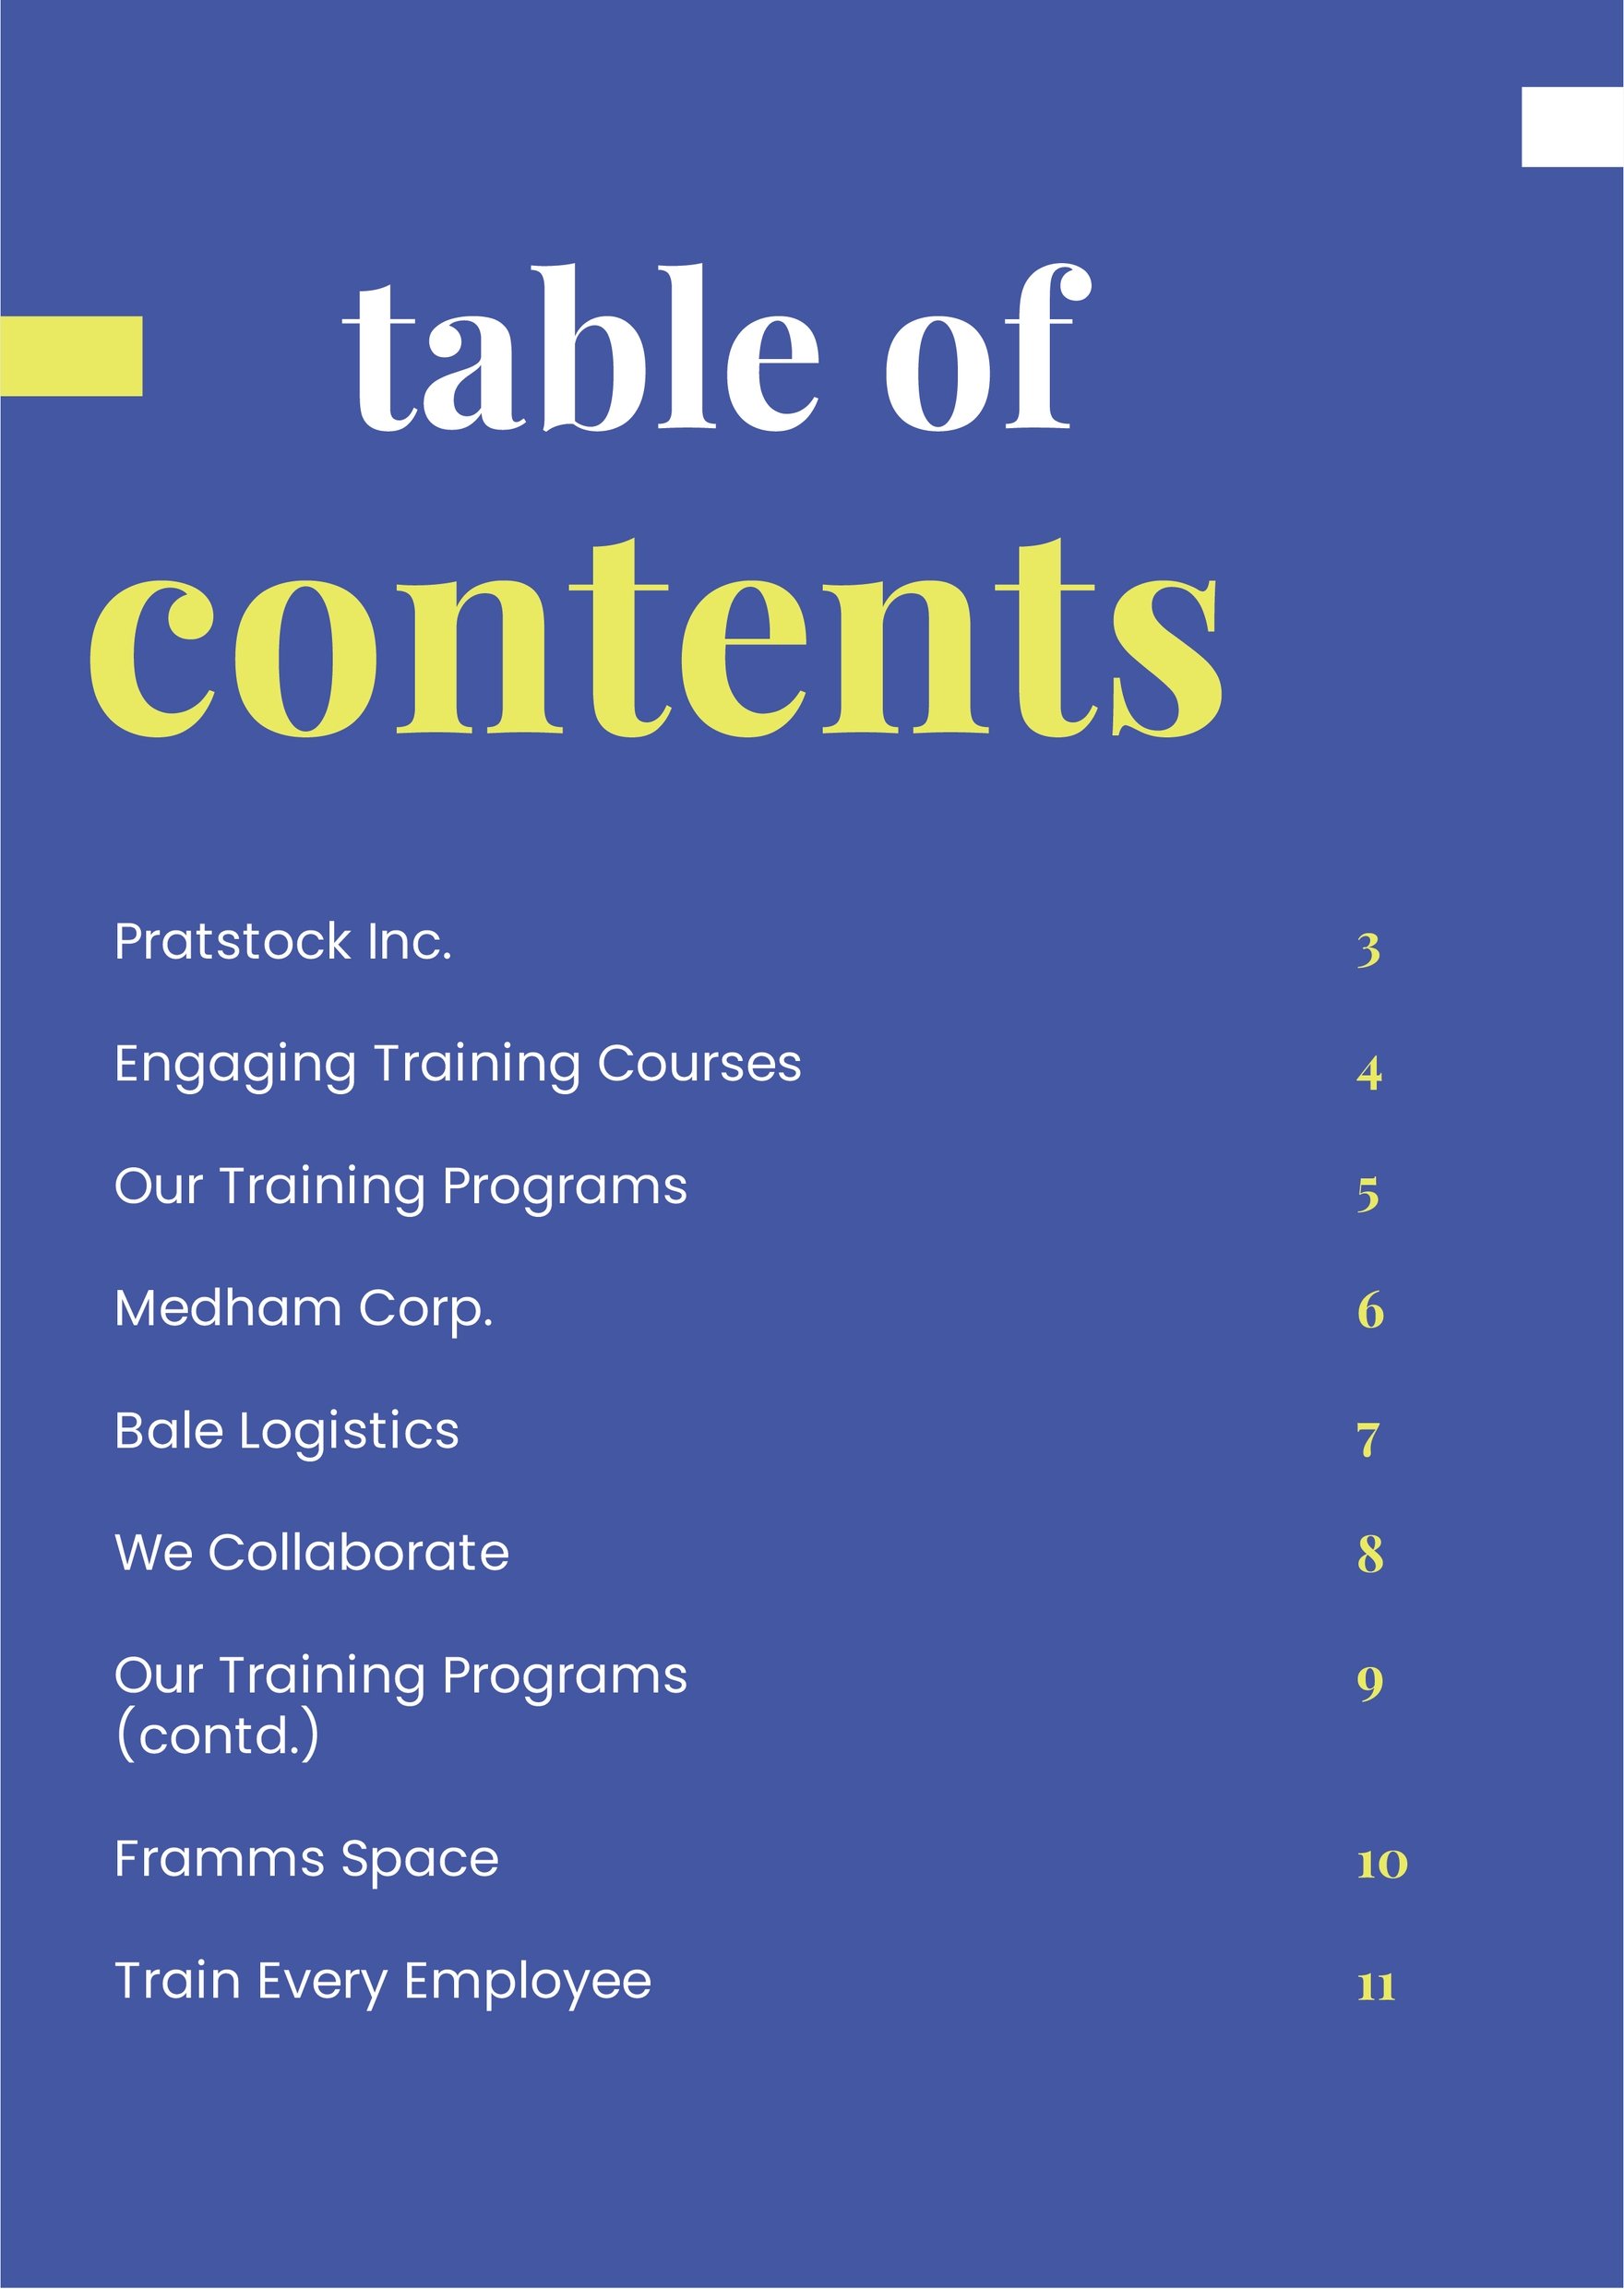 Employee Training Booklet Template